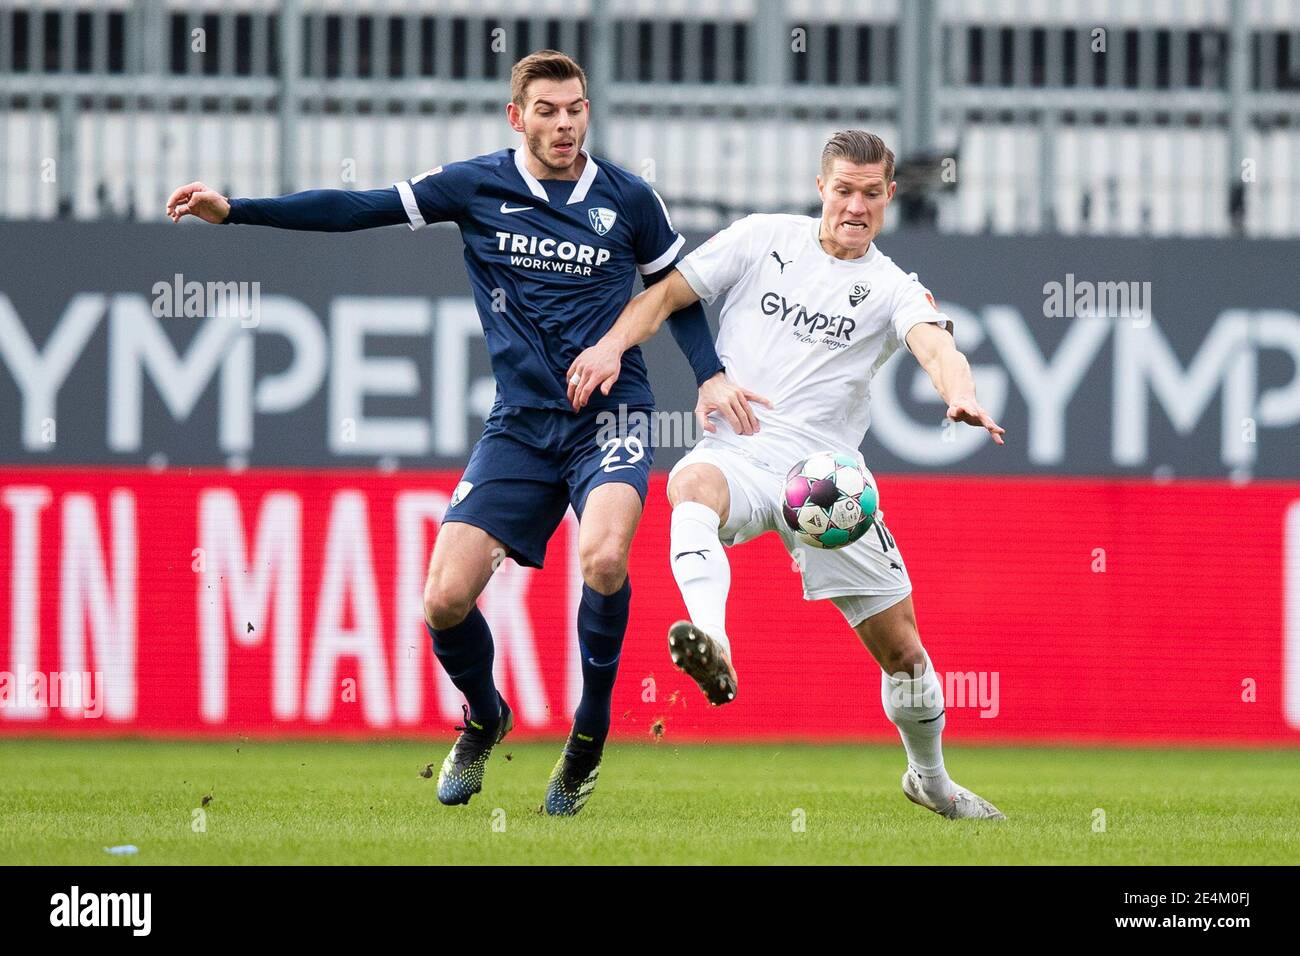 Sandhausen, Germany. 24th Jan, 2021. Football: 2. Bundesliga, SV Sandhausen - VfL Bochum, Matchday 17, BWT-Stadion am Hardtwald. Bochum's Maxim Leitsch (l) in action against Sandhausen's Kevin Behrens. Credit: Tom Weller/dpa - IMPORTANT NOTE: In accordance with the regulations of the DFL Deutsche Fußball Liga and/or the DFB Deutscher Fußball-Bund, it is prohibited to use or have used photographs taken in the stadium and/or of the match in the form of sequence pictures and/or video-like photo series./dpa/Alamy Live News Stock Photo